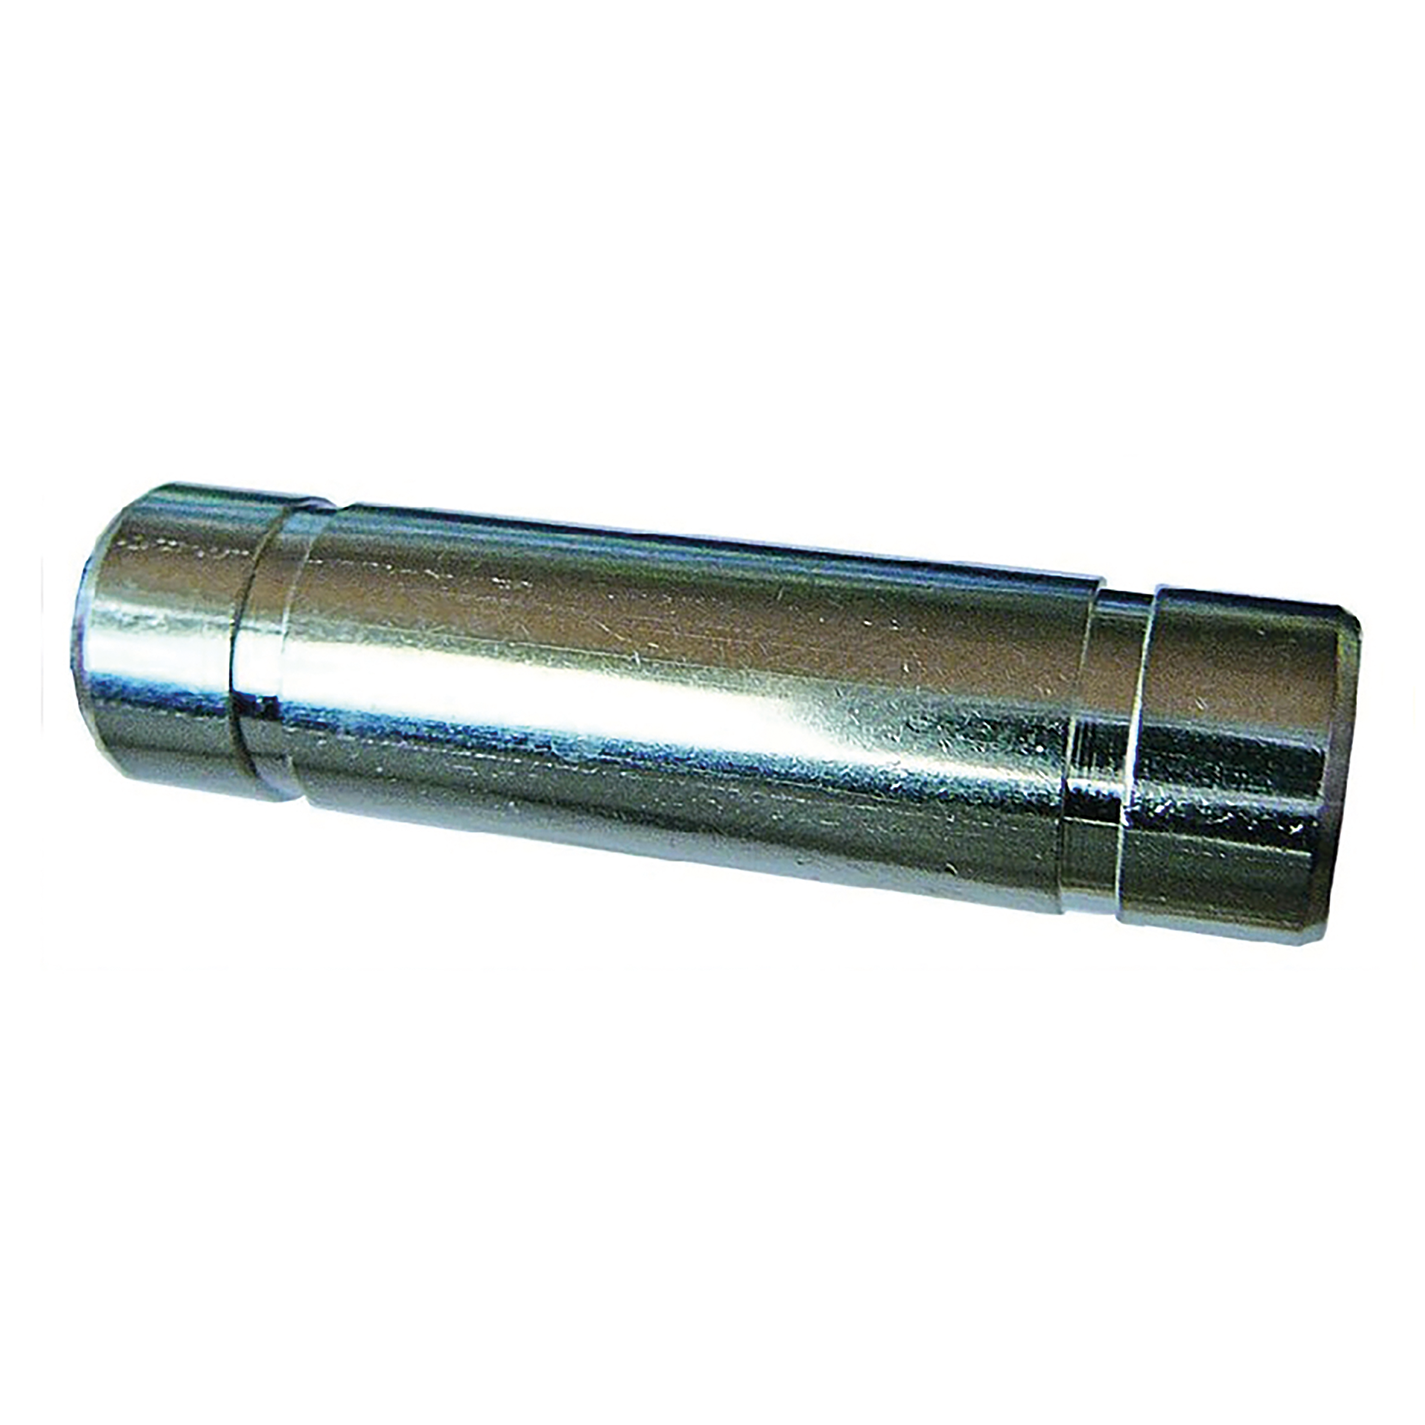 12mm O/D Stem Connector - Nickel Plated